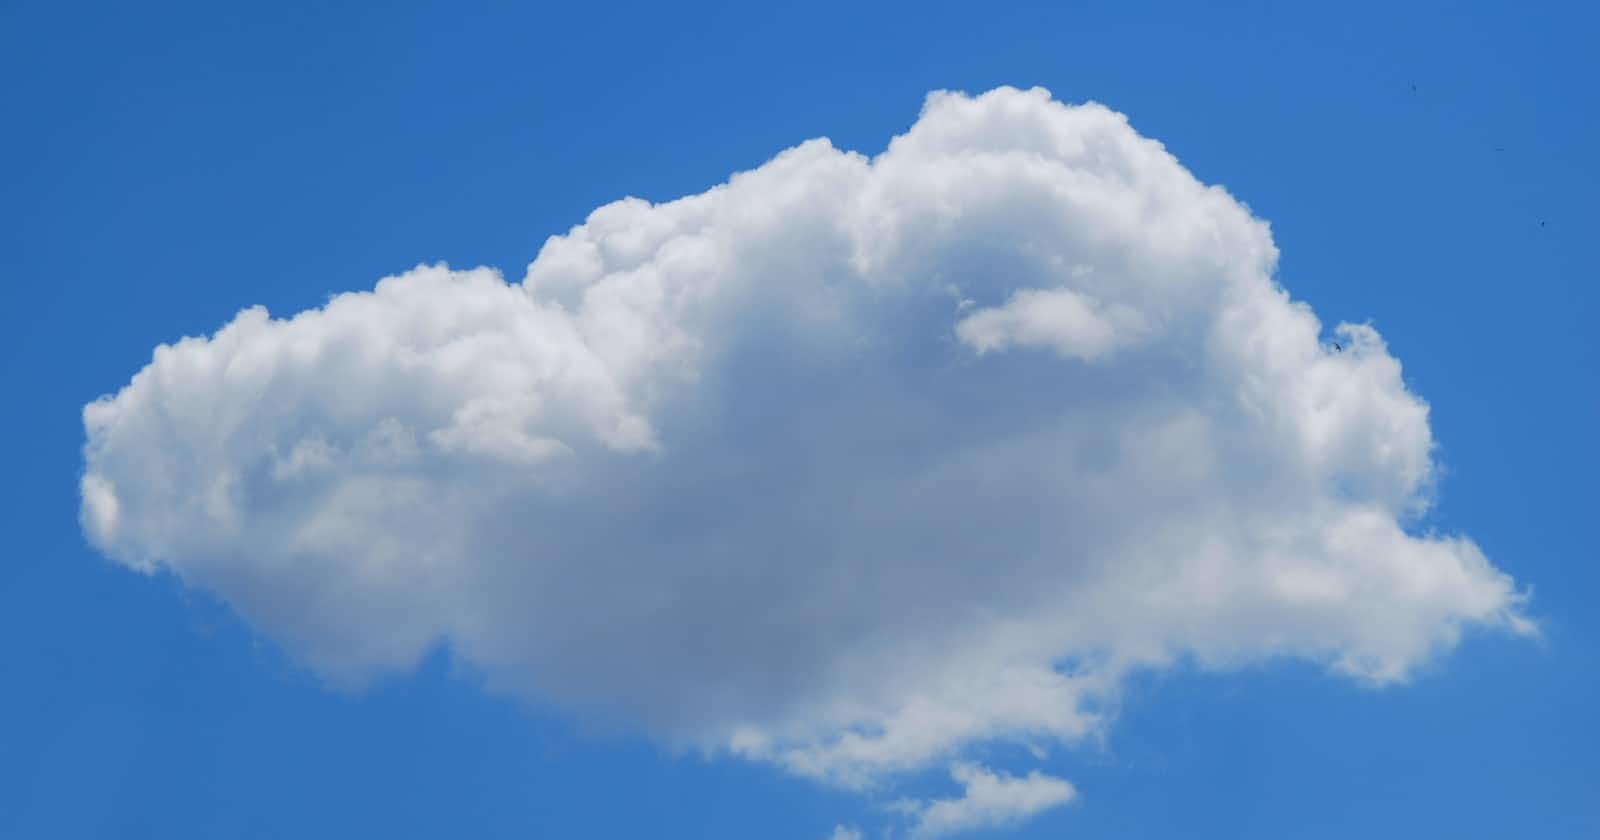 Why the Cloud Revolution is just getting started?